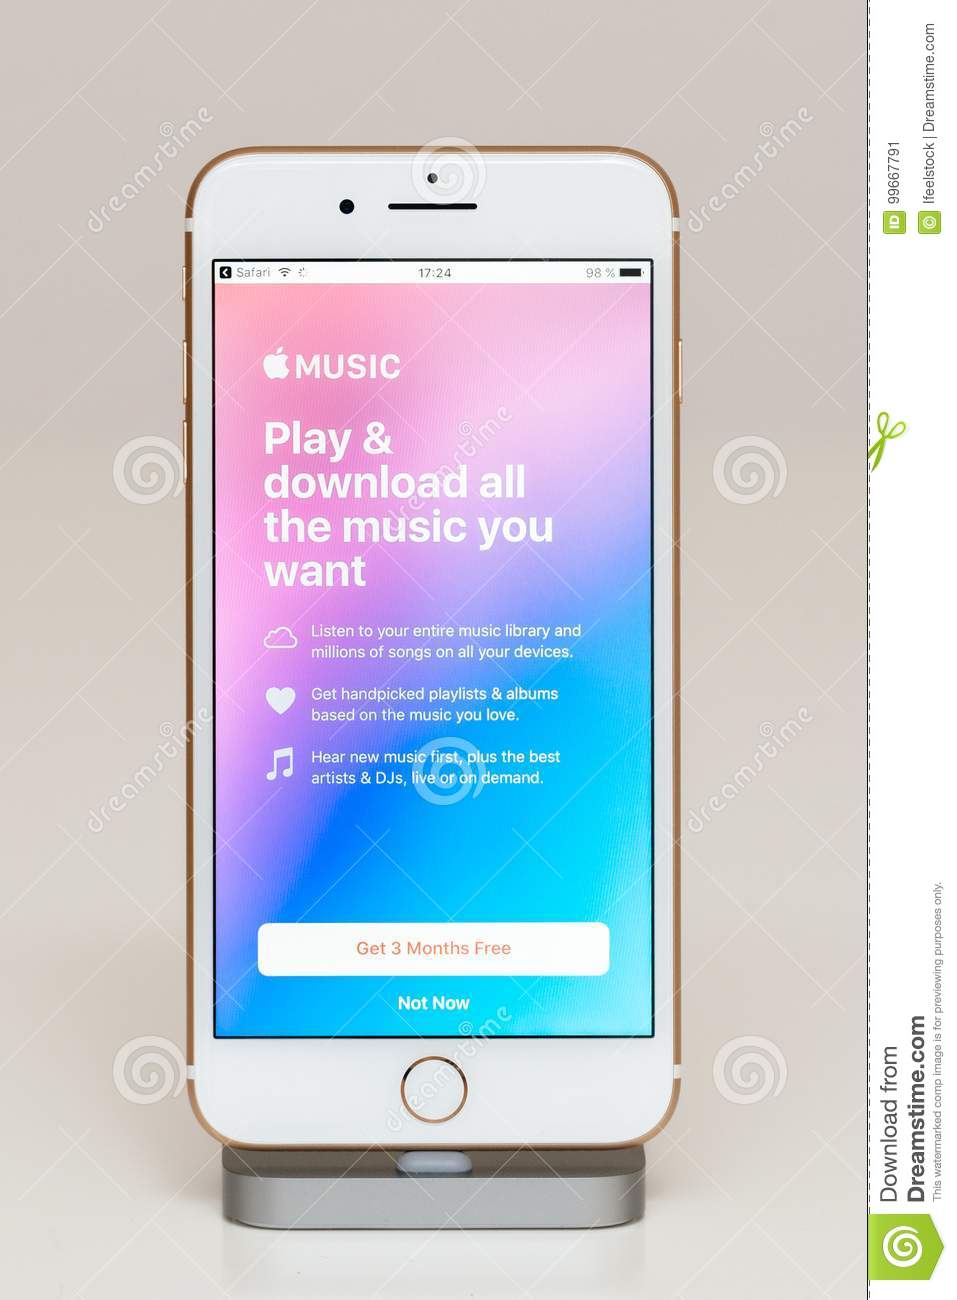 Apple iphone 4s itunes software free download